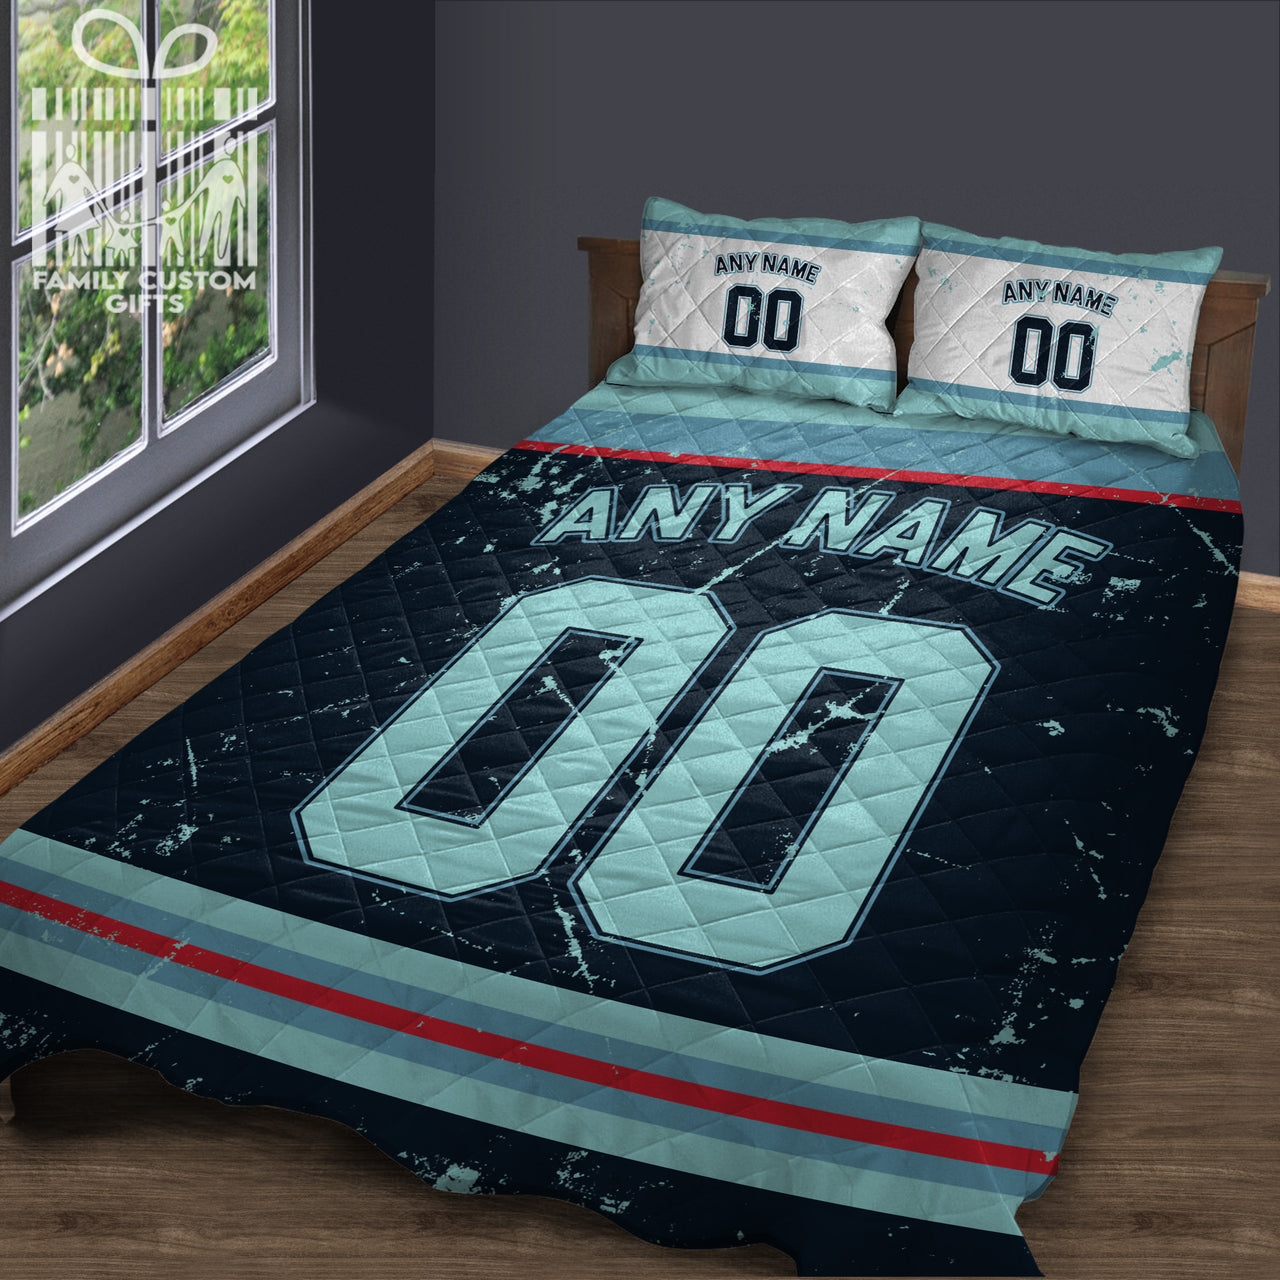 Custom Quilt Sets Seattle Jersey Personalized Ice hockey Premium Quilt Bedding for Men Women